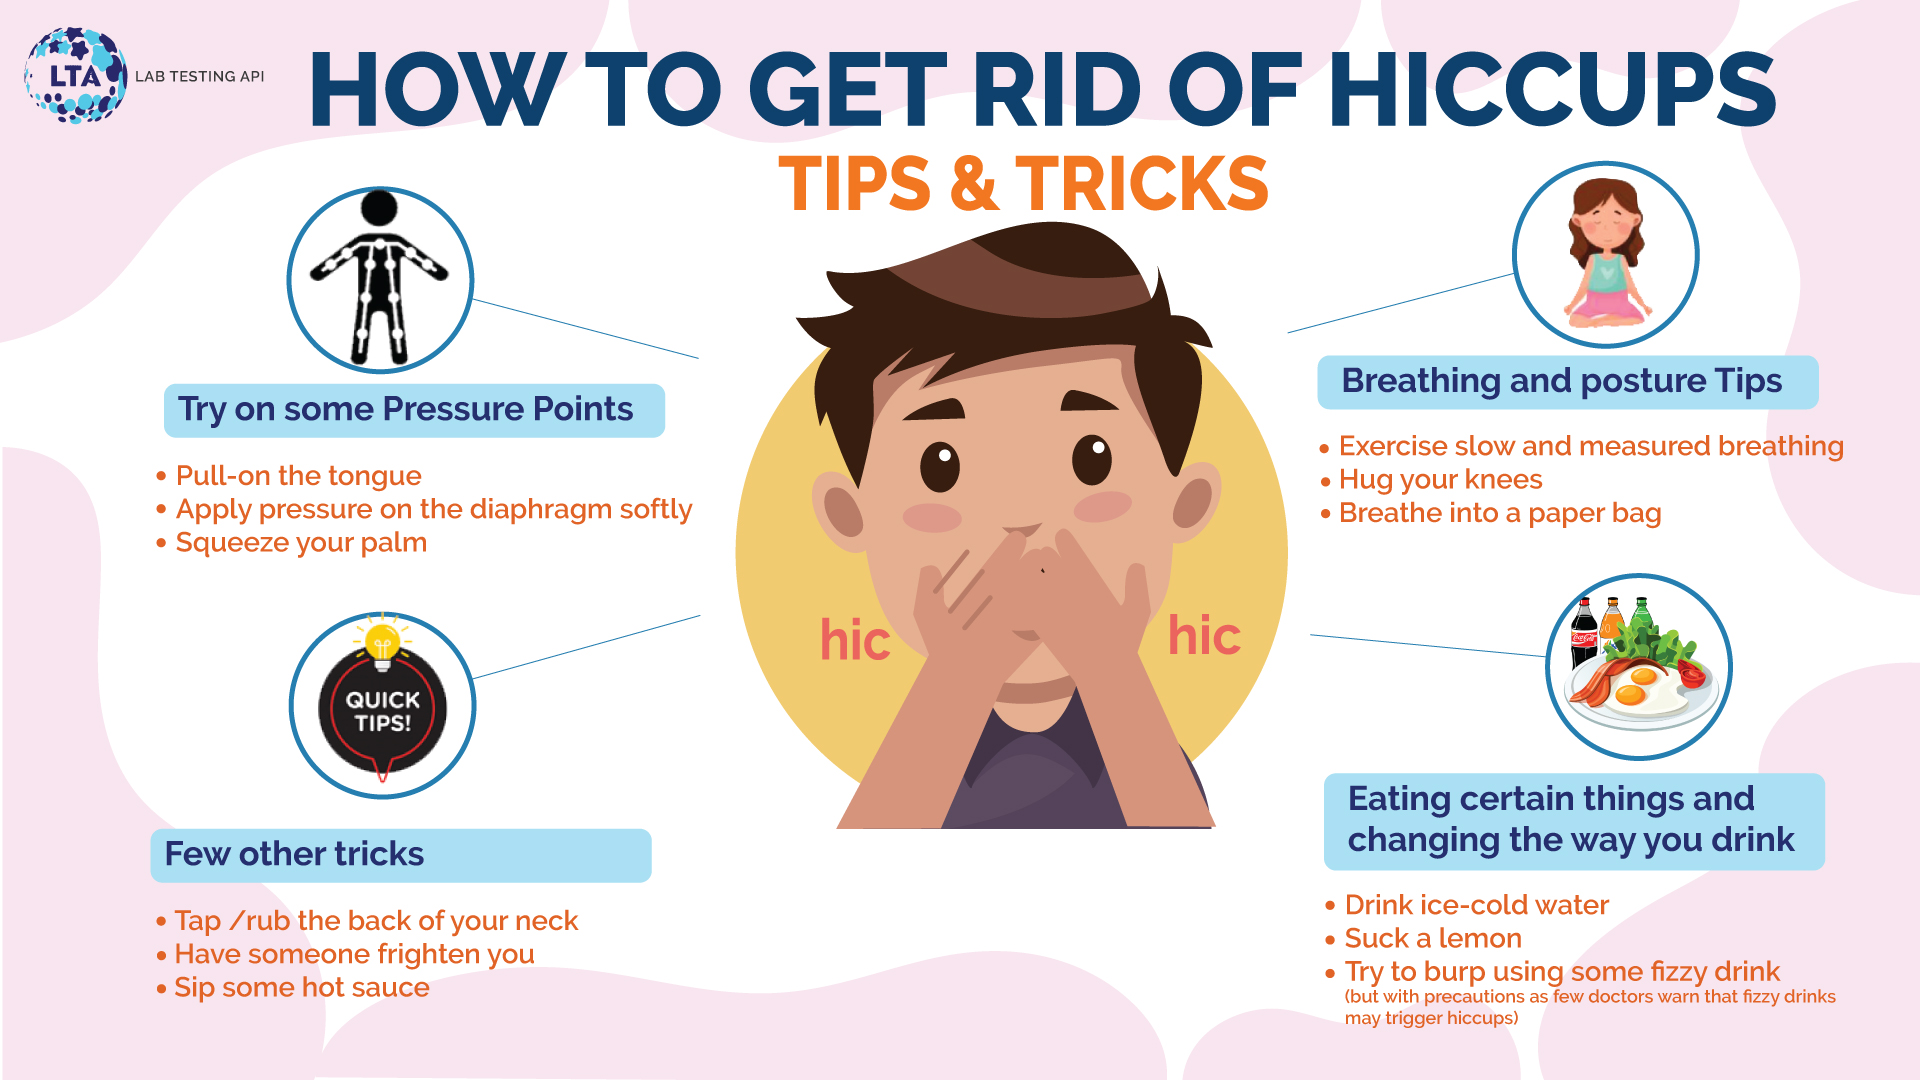 How to get rid of Hiccups: Few quick tips and tricks. 